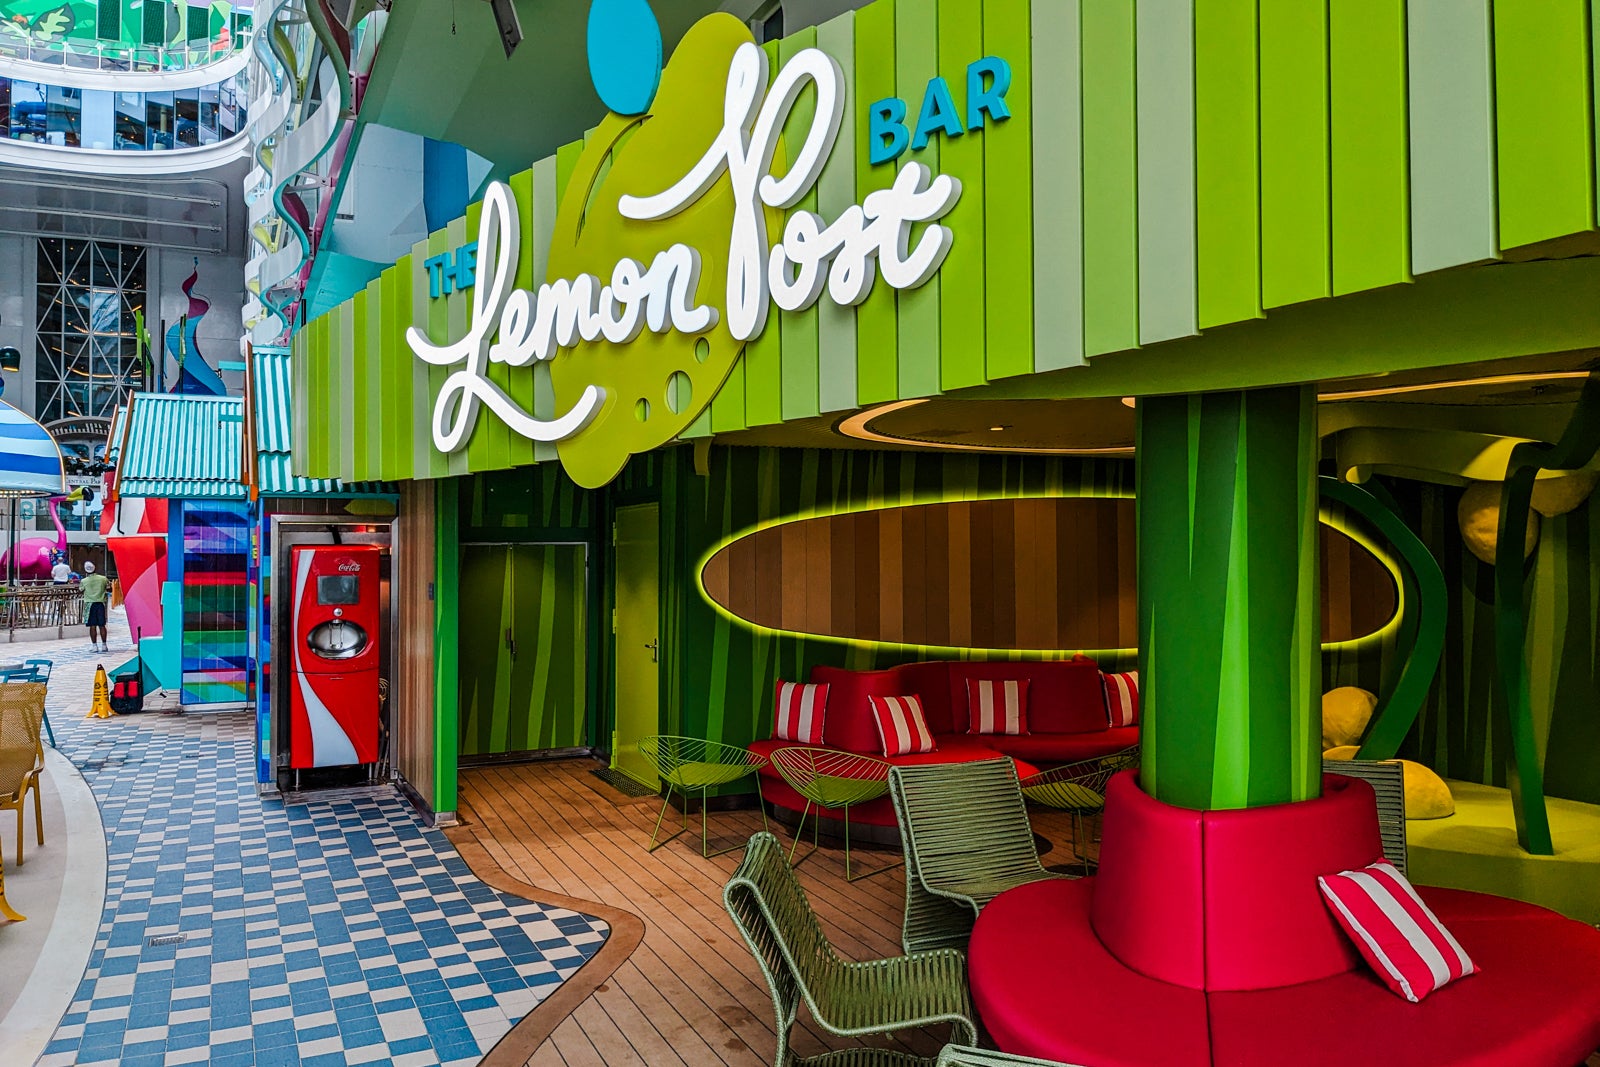 Seating area for The Lemon Post Bar on Icon of the Seas